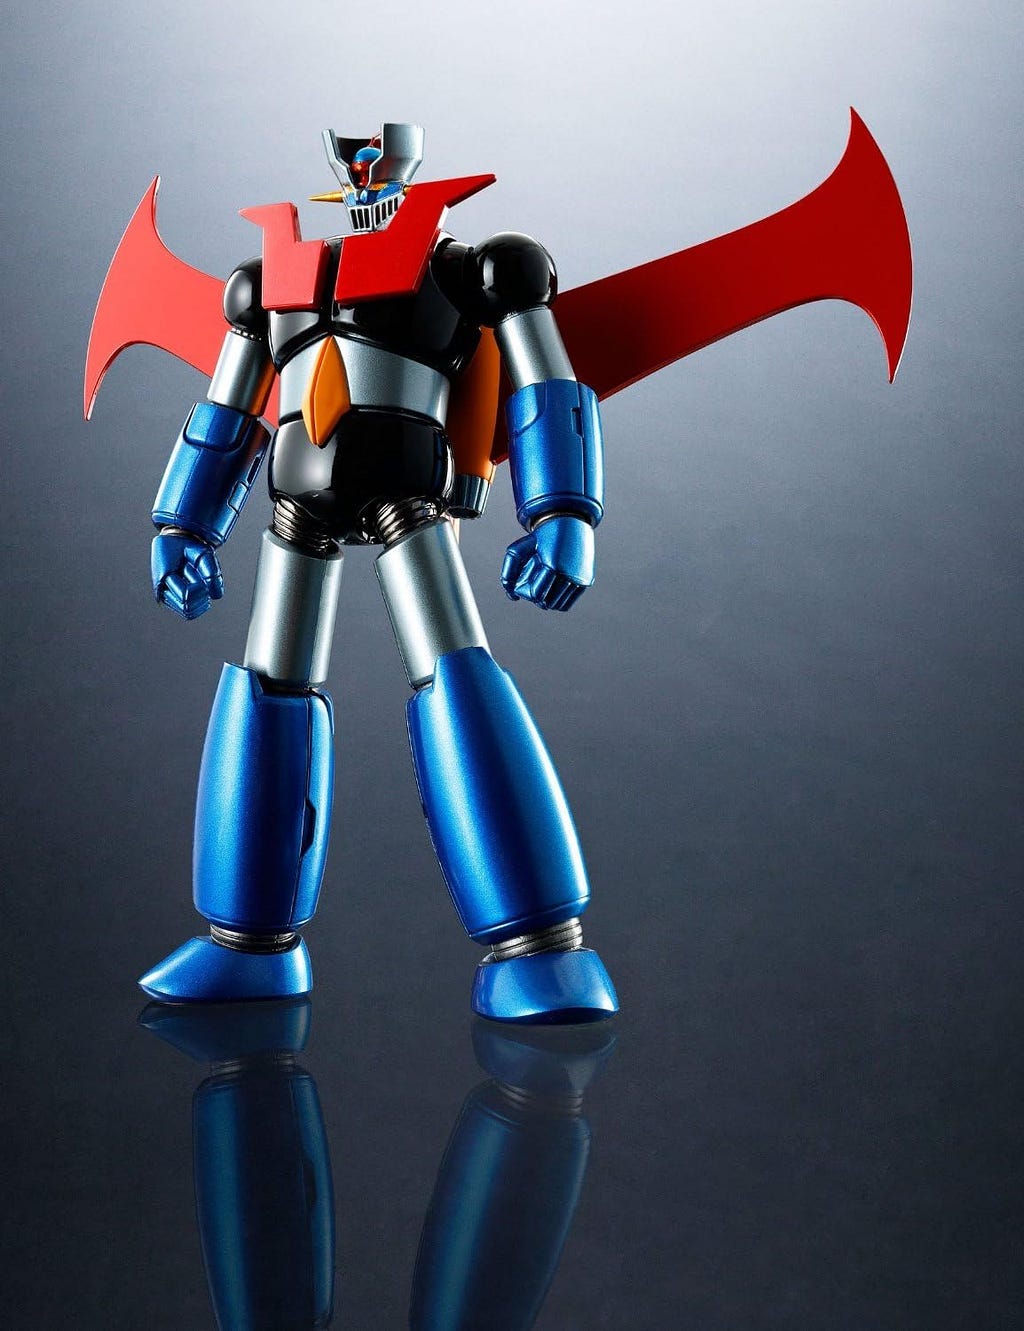 Image of full Mazinger Z ‘Iron Cutter’ edition action figure posed in a relaxed stance with hands down at its sides.